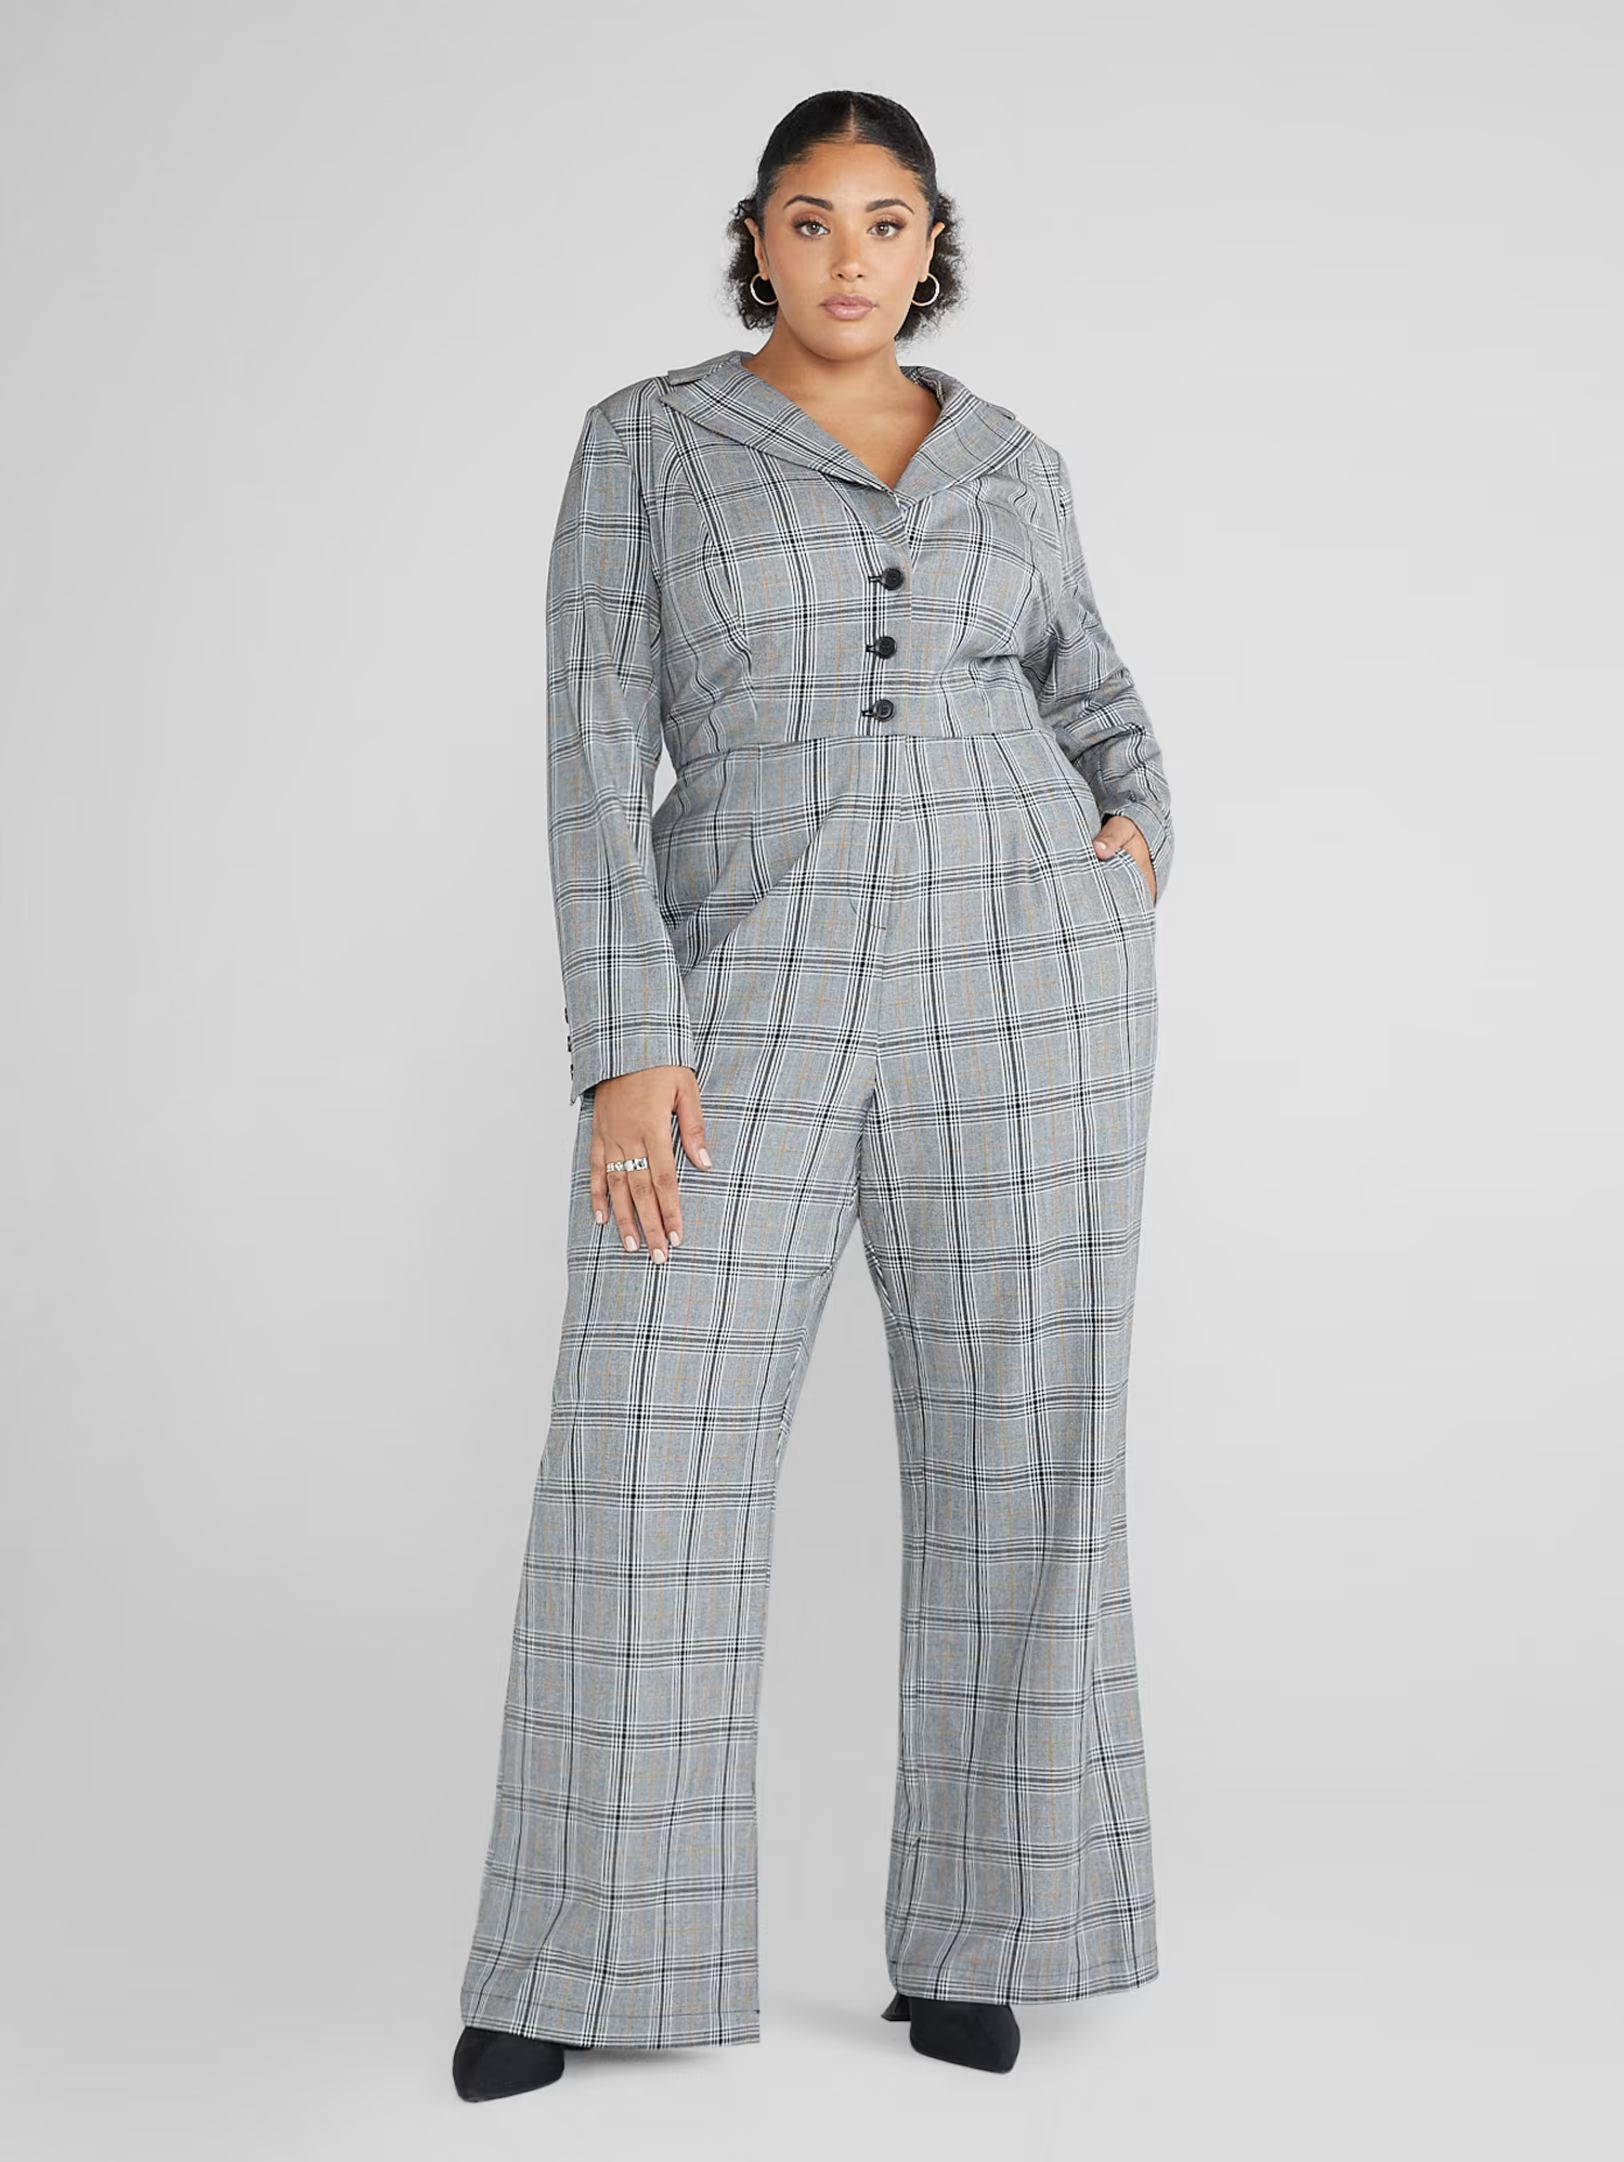 Plus Size The Boss Moves Jumpsuit - FTF LAB 010: BEAUTICURVE | Fashion to Figure | Fashion To Figure